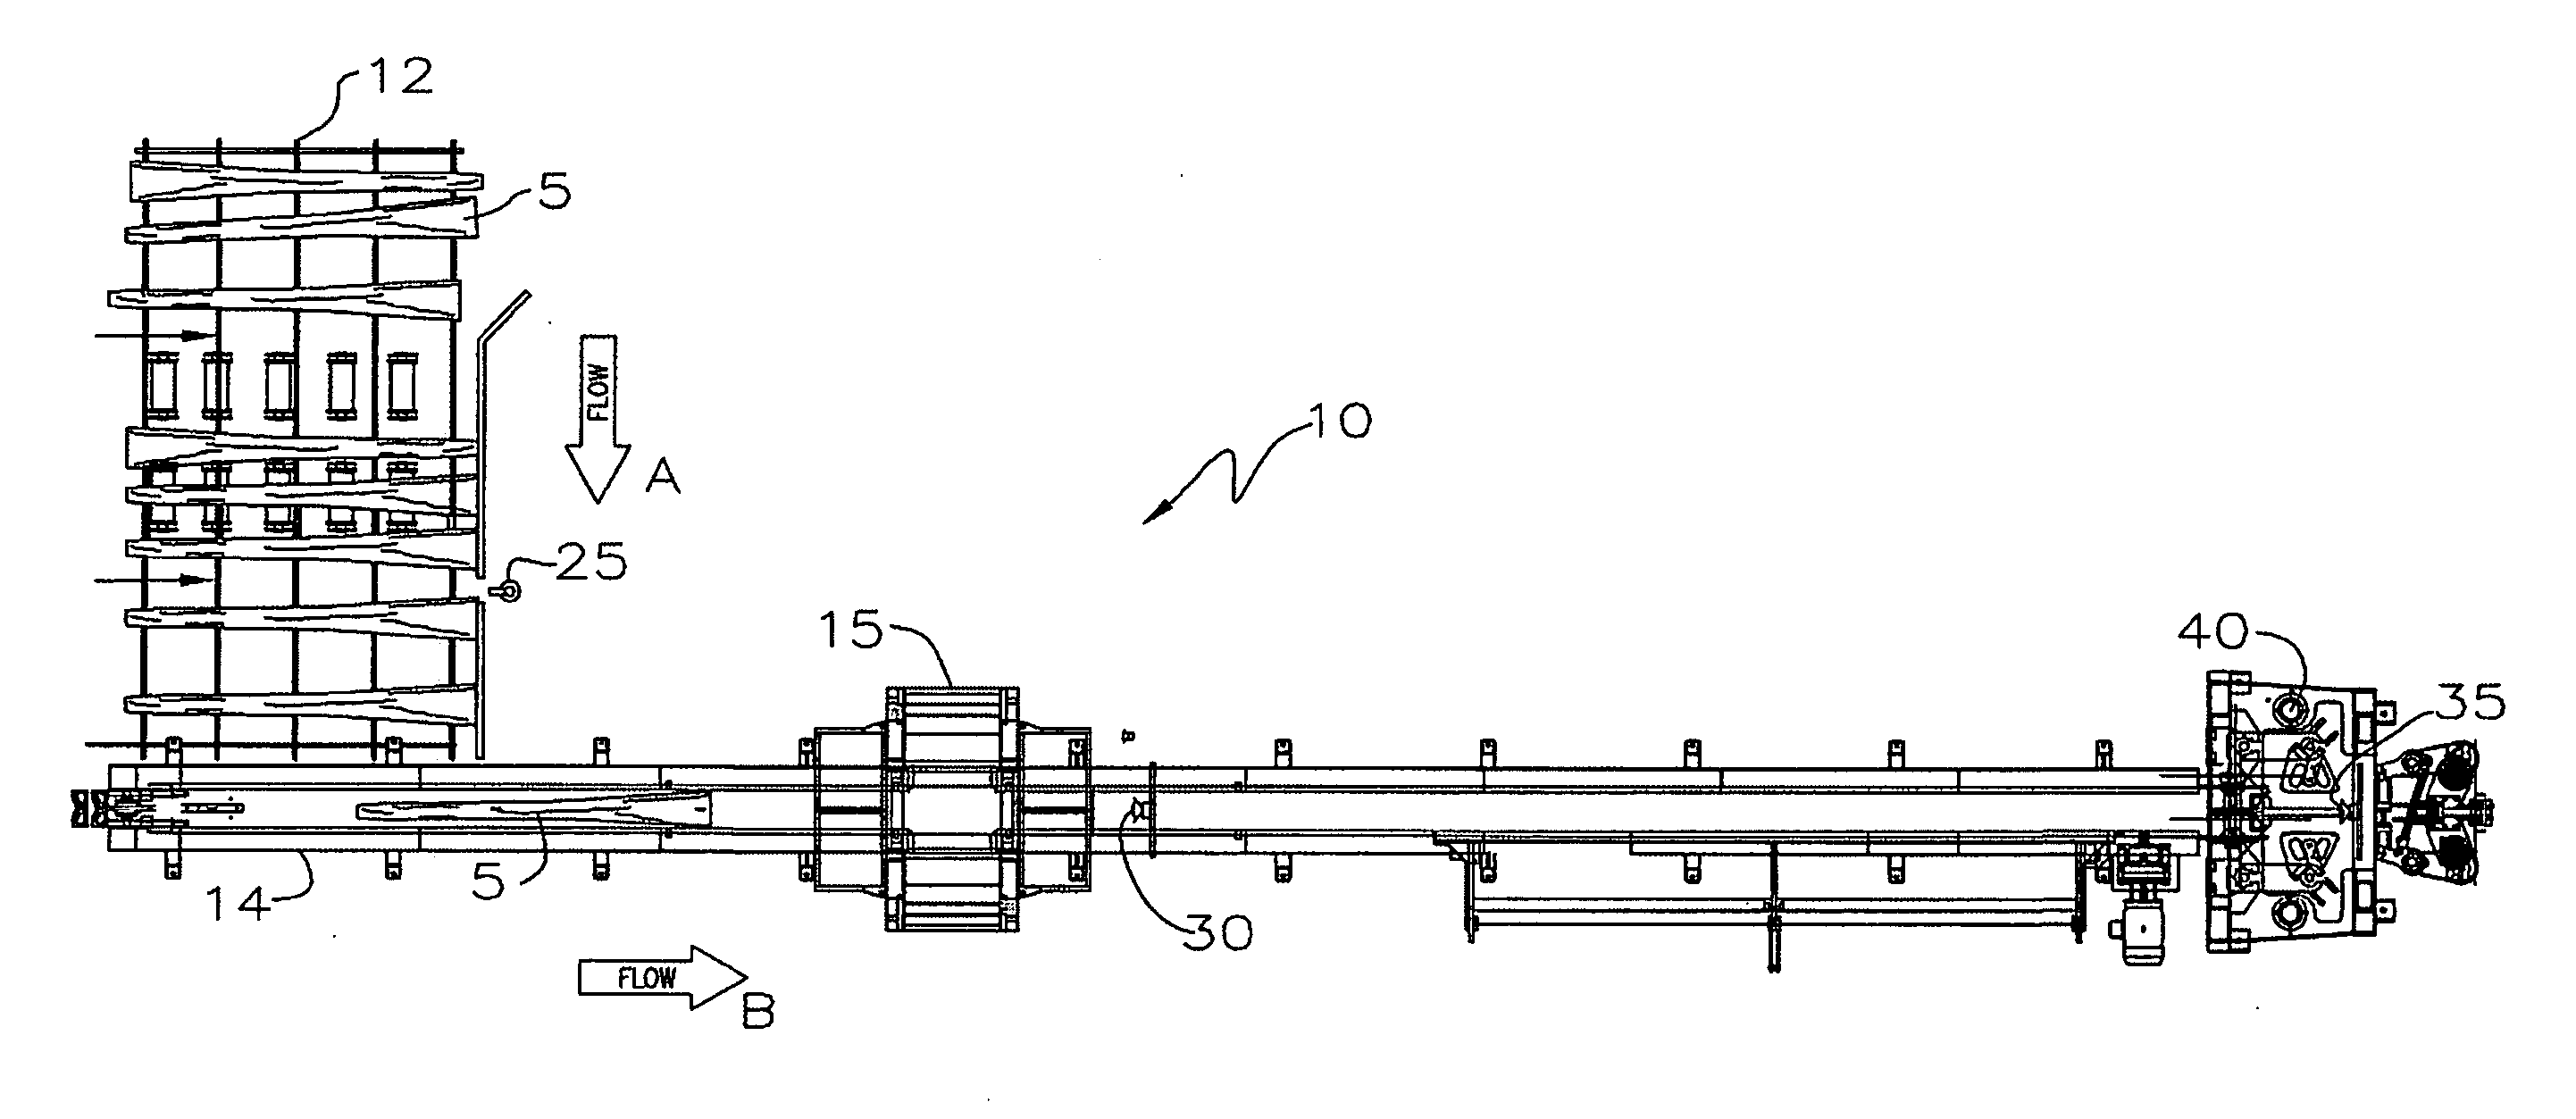 System for positioning a workpiece